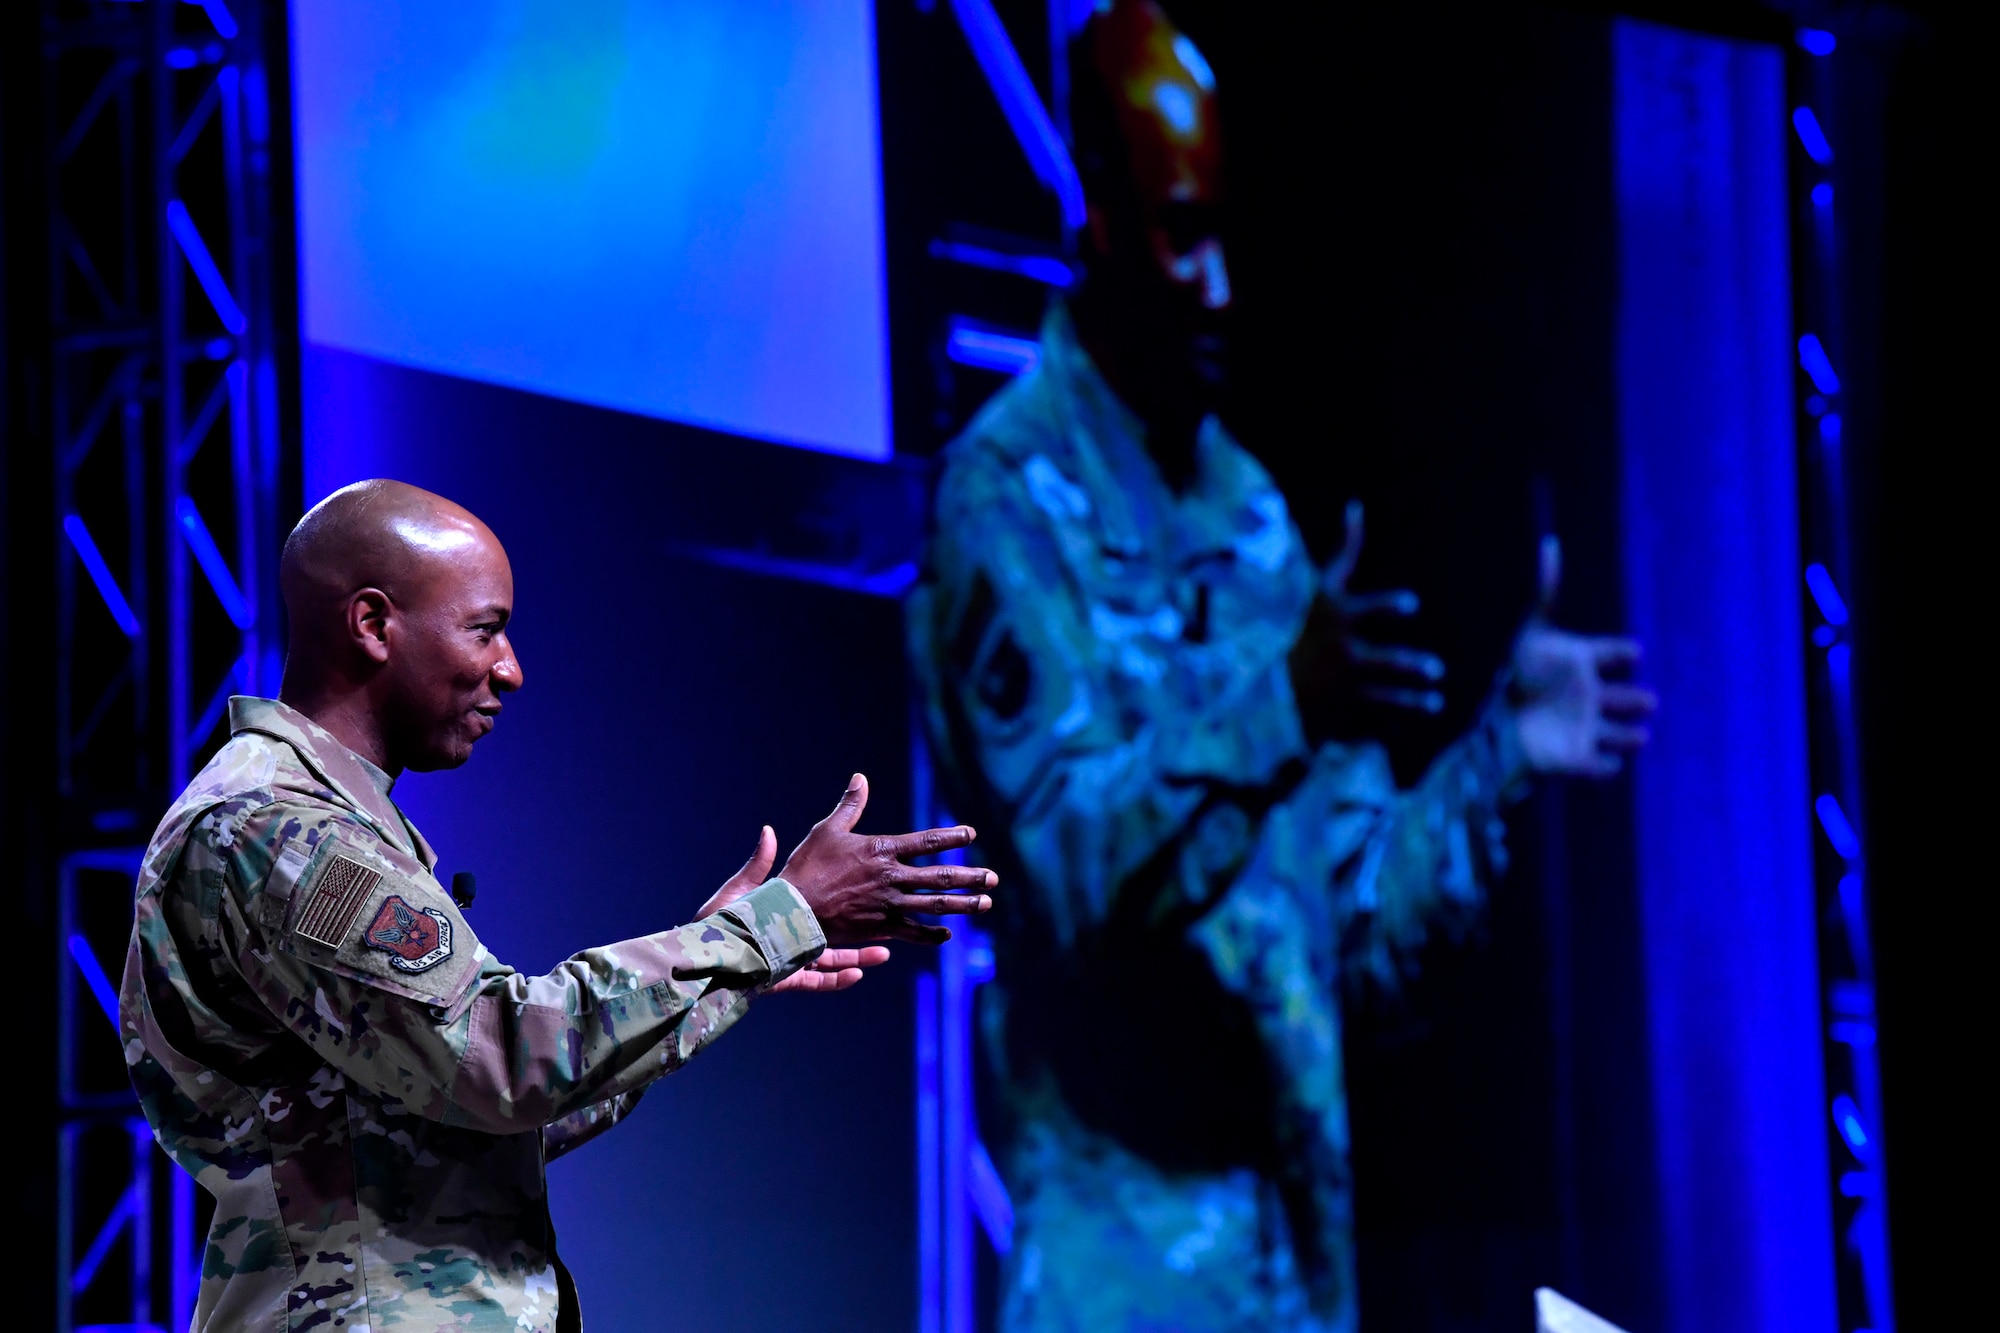 Chief Master Sgt. of the Air Force Kaleth O. Wright gives remarks during the Air Force Association’s Air Warfare Symposium in Orlando, Fla., March 1, 2019. During their remarks Goldfein and Wright highlighted the importance of inspirational and courageous leadership. (U.S. Air Force photo by Wayne Clark)